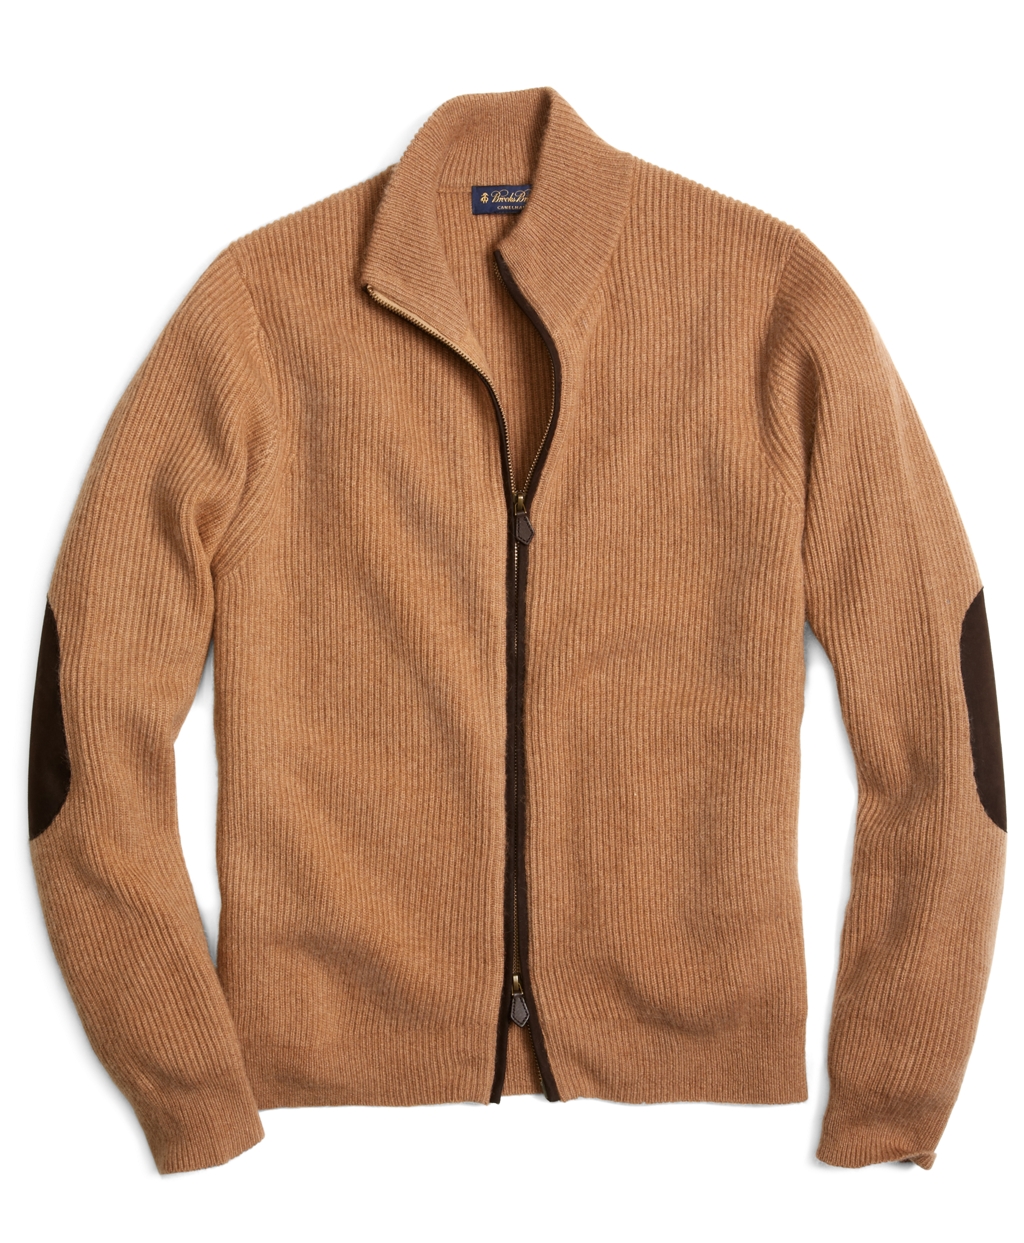 Lyst - Brooks Brothers Camel Hair Fullzip Cardigan in Brown for Men